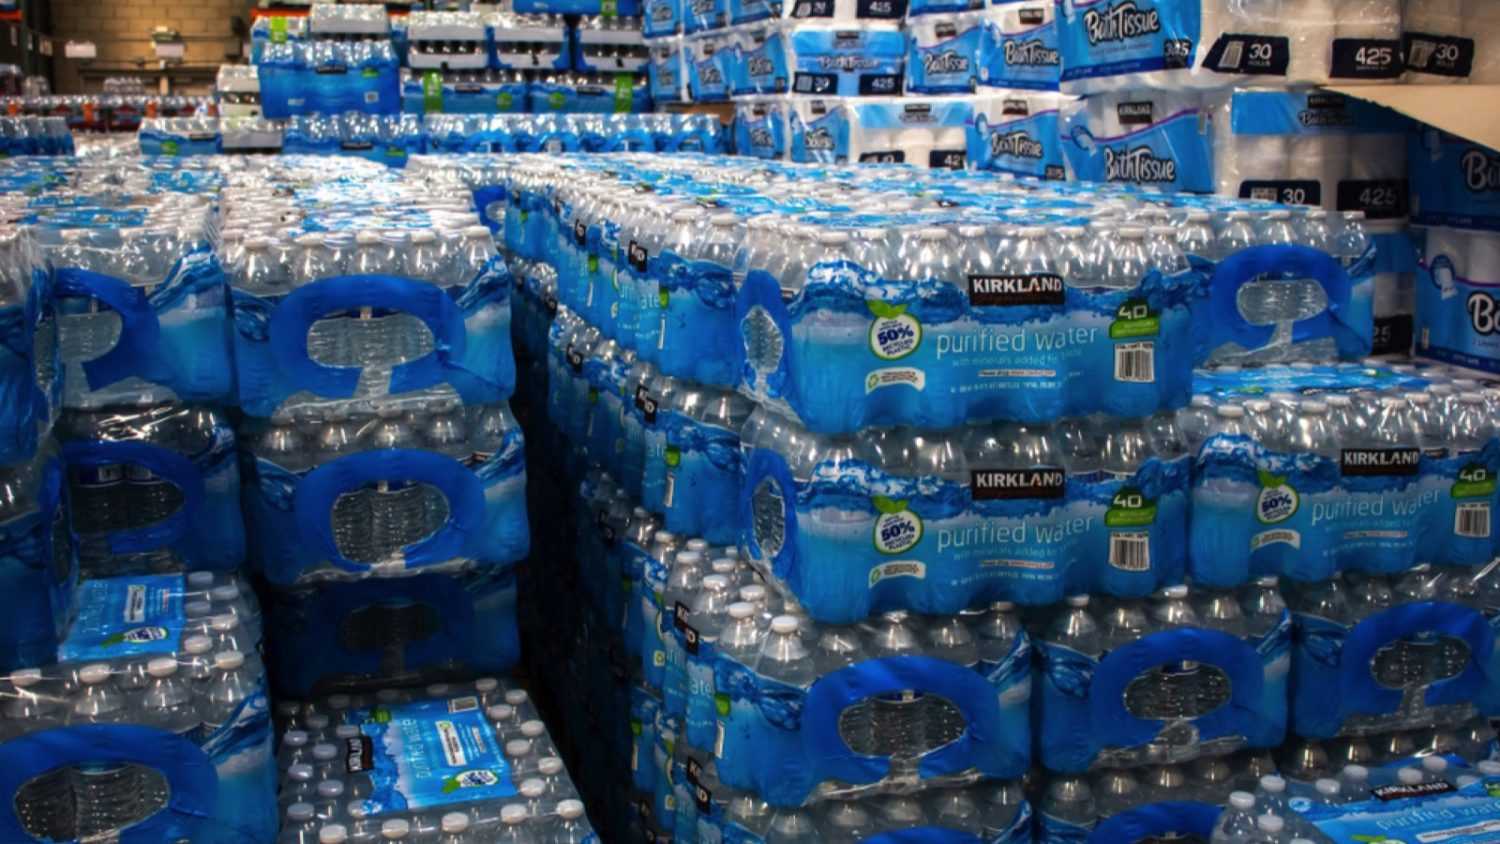 Los Angeles, California, United States - 03-18-2019: A view of several stacks of Kirkland Signature water bottle cases, on display at a local Costco.